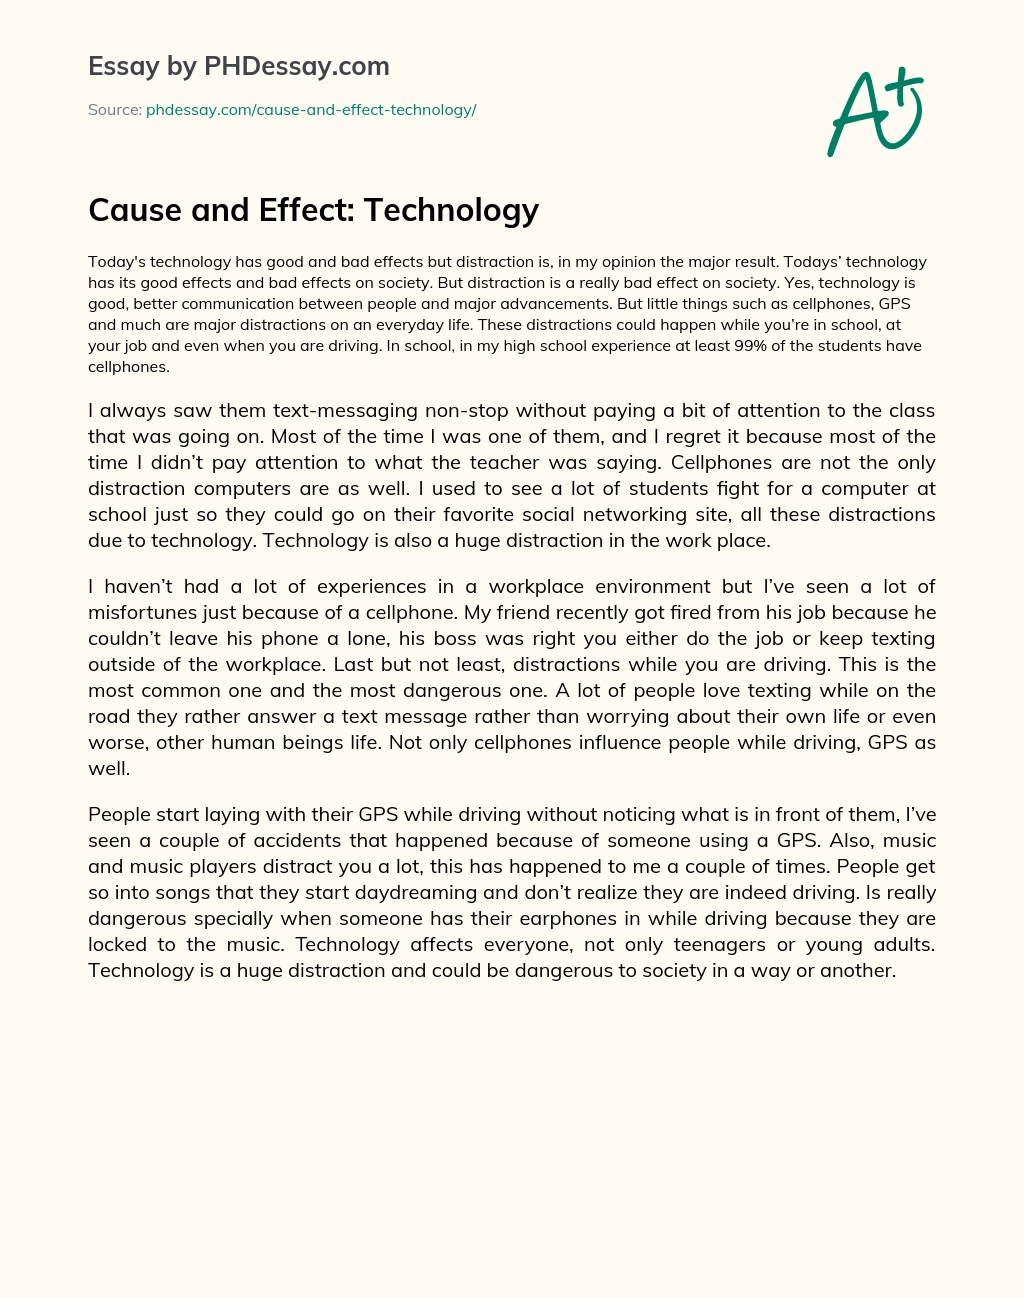 Cause and Effect: Technology